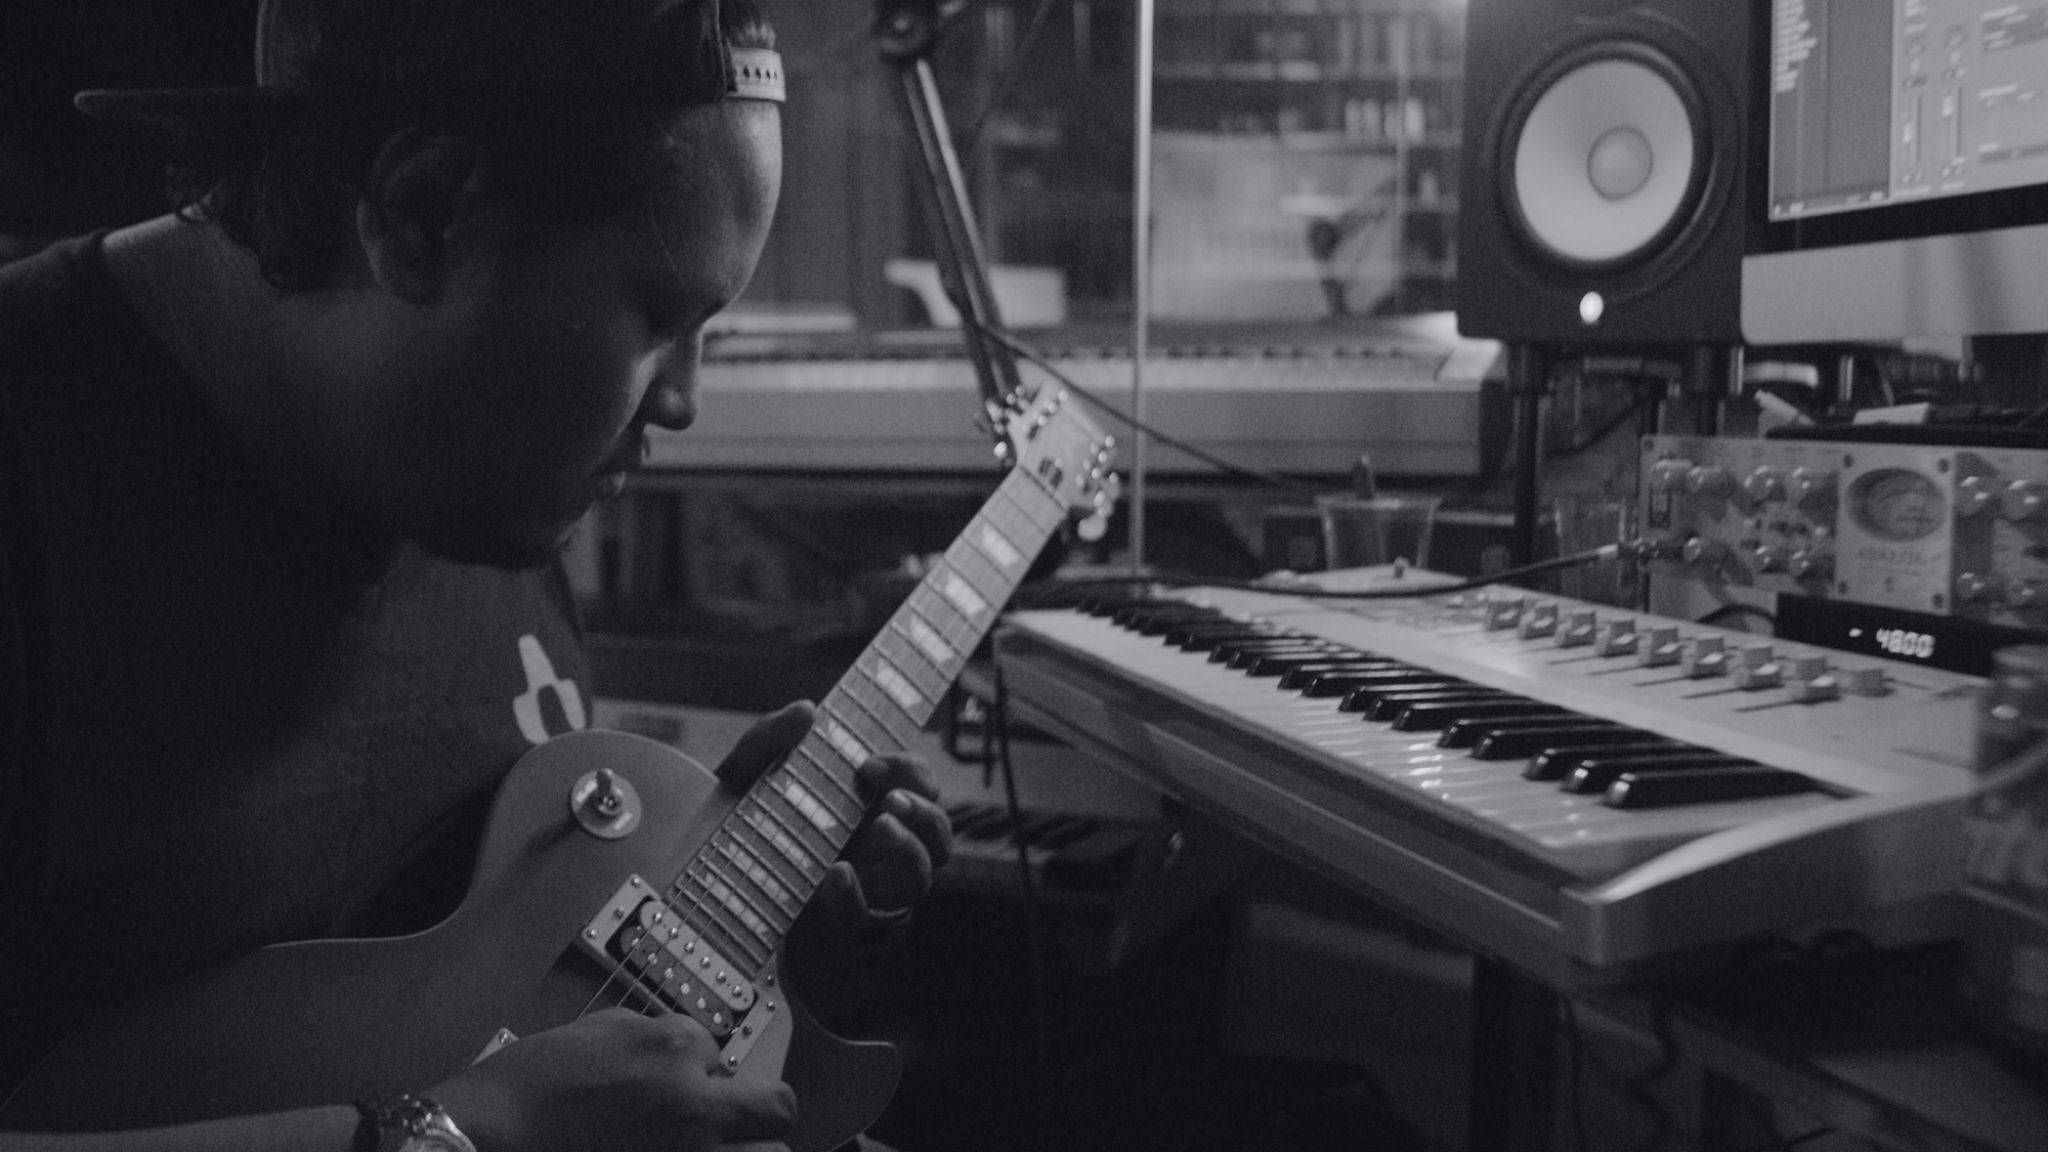 IU C&I Studios Page C&I Studios Blog Composer for Film Black and white side profile of man playing a guitar by a keyboard in a studio